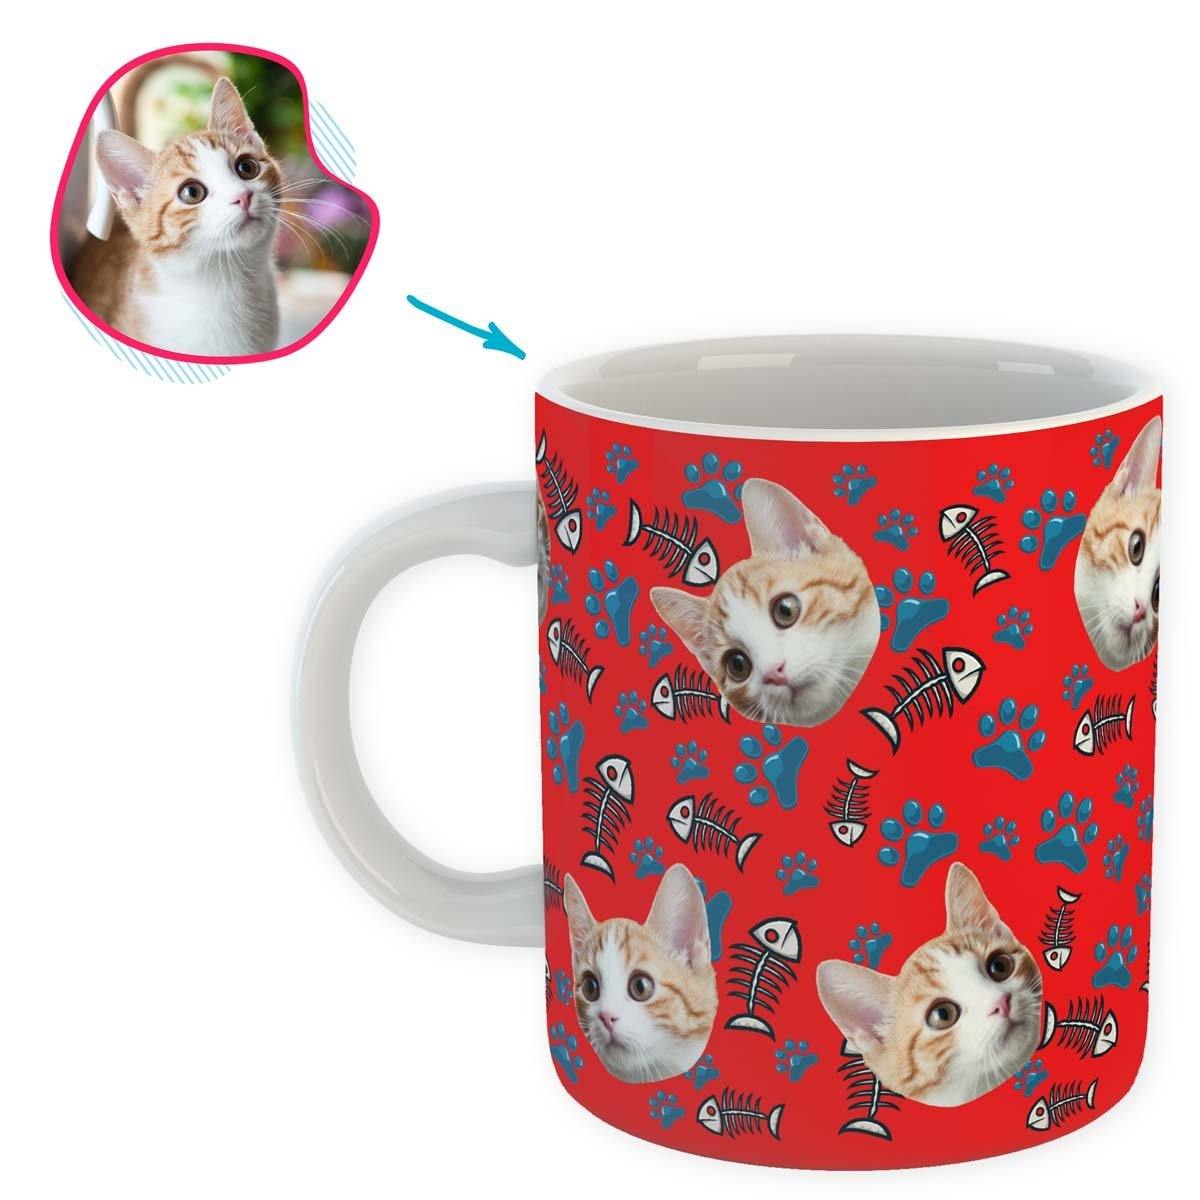 red Cat mug personalized with photo of face printed on it